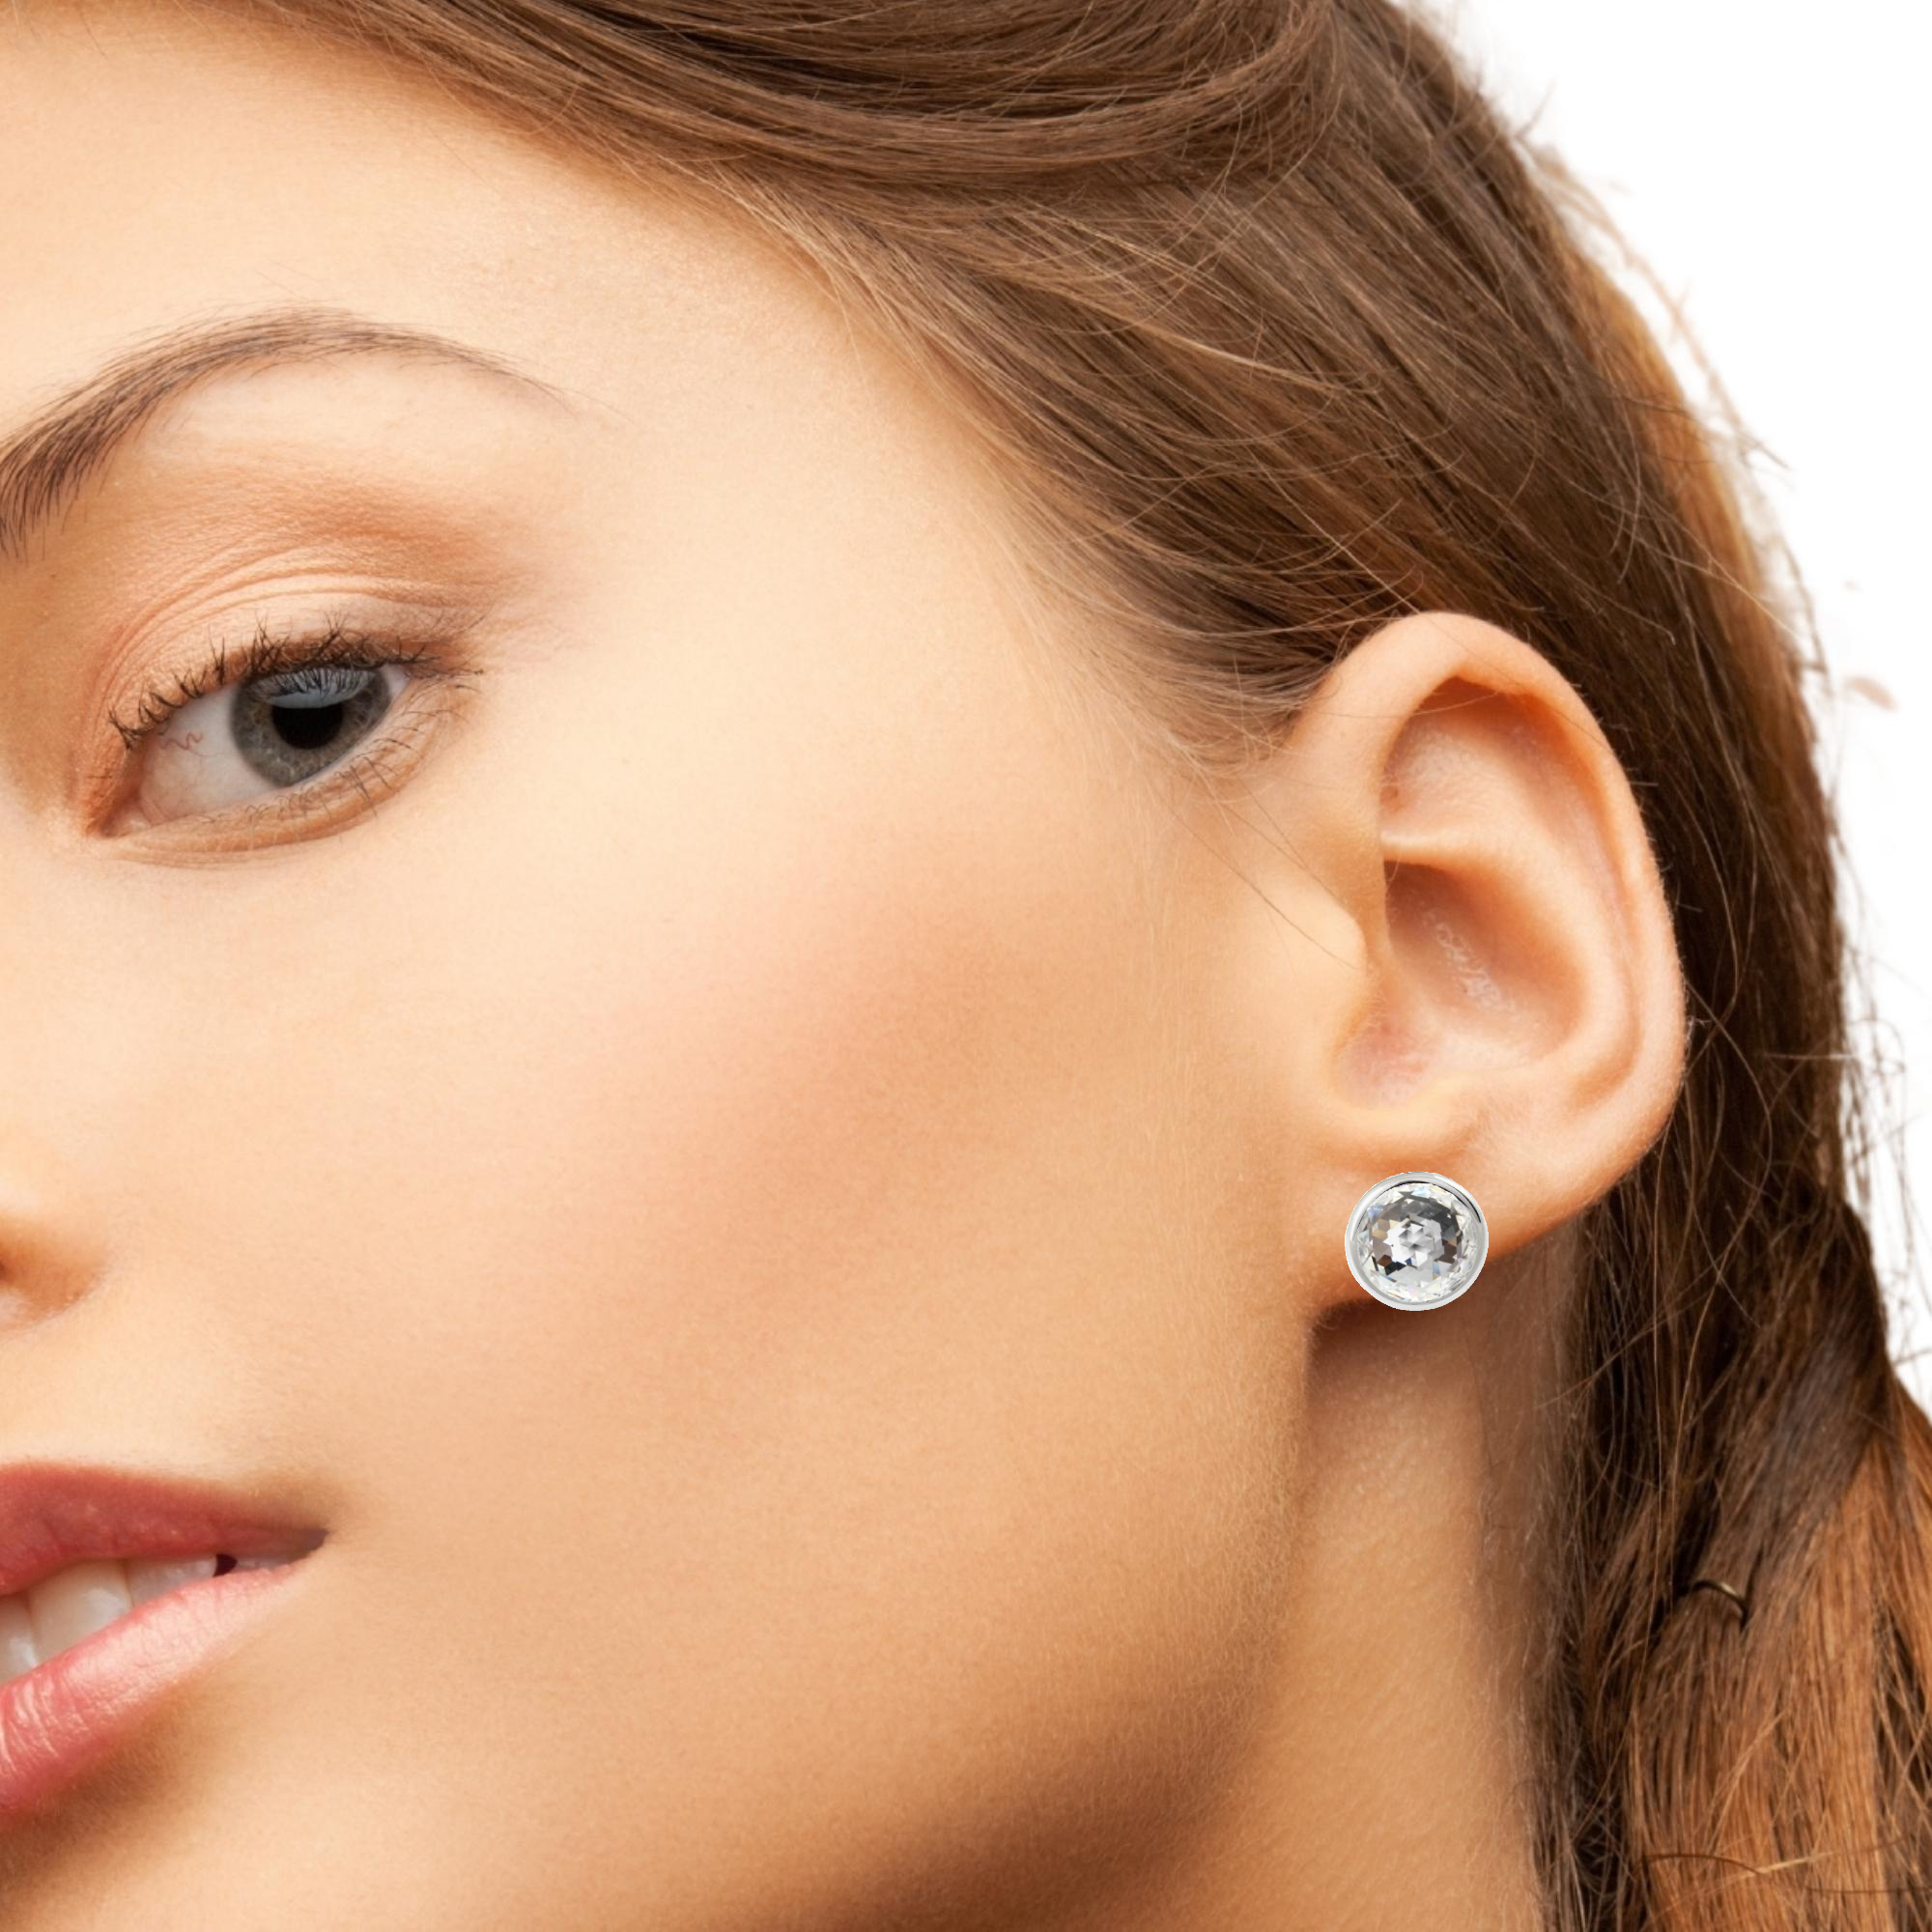 Crystal Clarity Rose-Cut Clip-On Earring in Silver